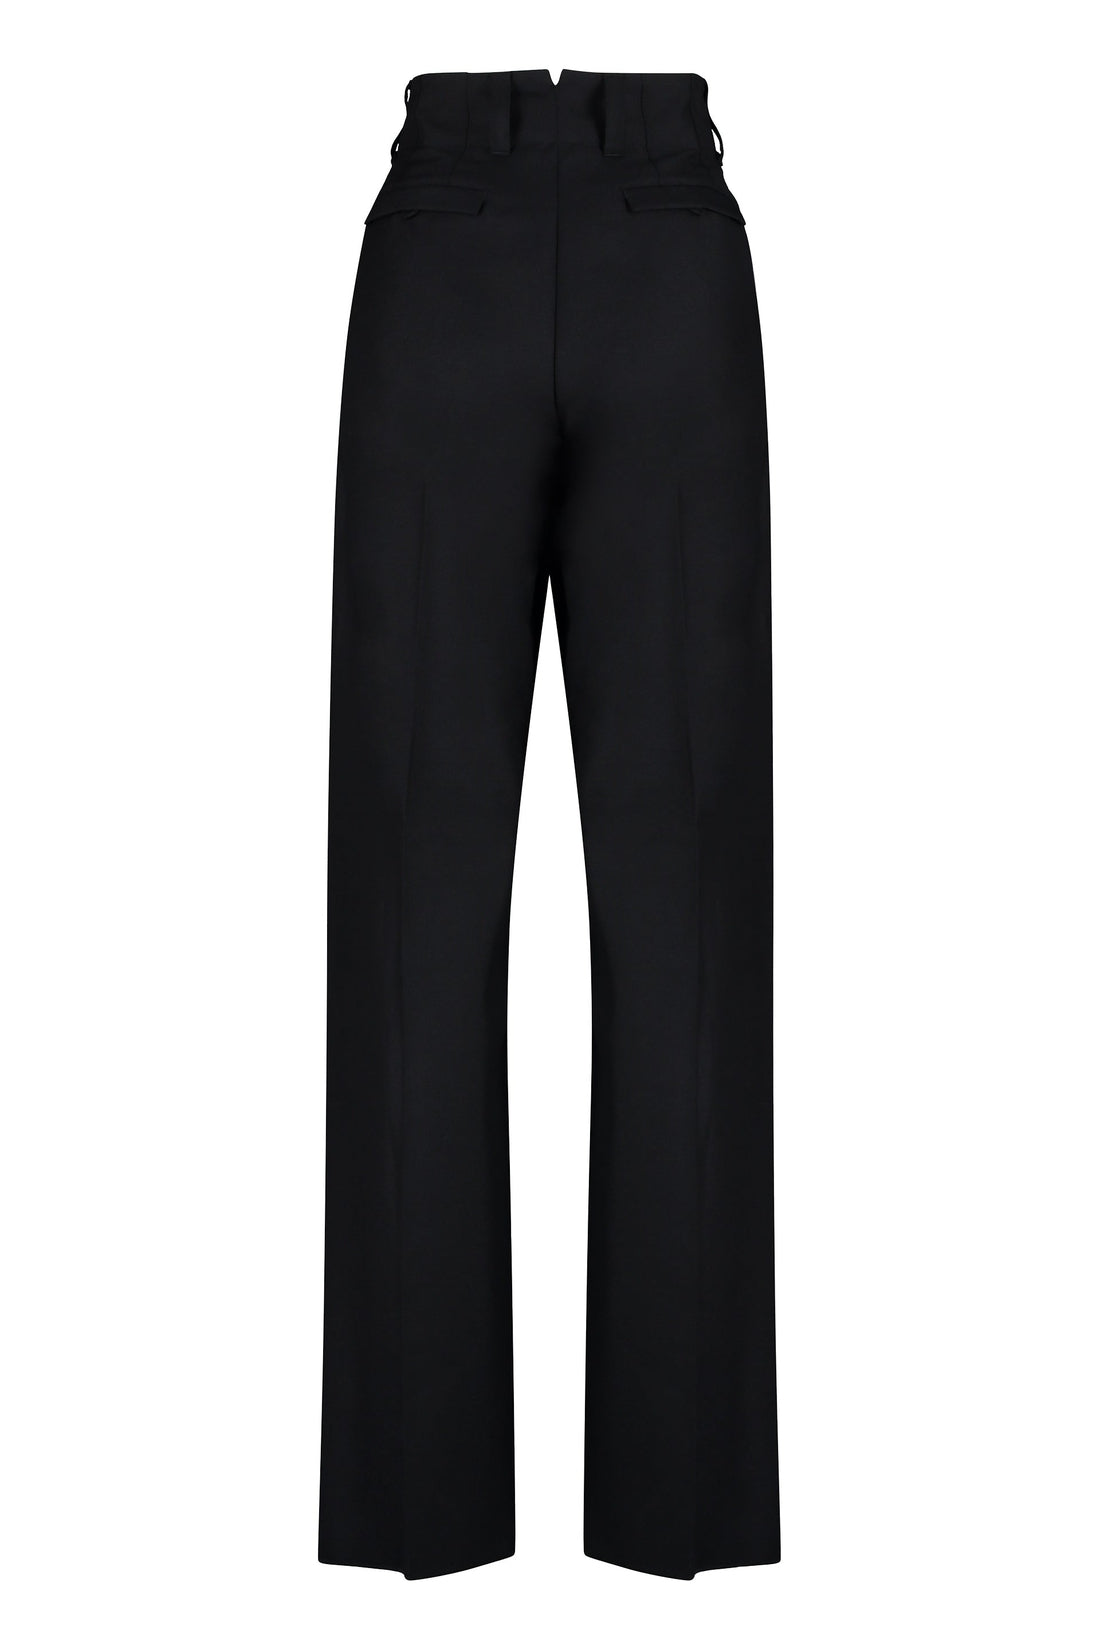 Salvatore Ferragamo-OUTLET-SALE-Wool and mohair tailored trousers-ARCHIVIST